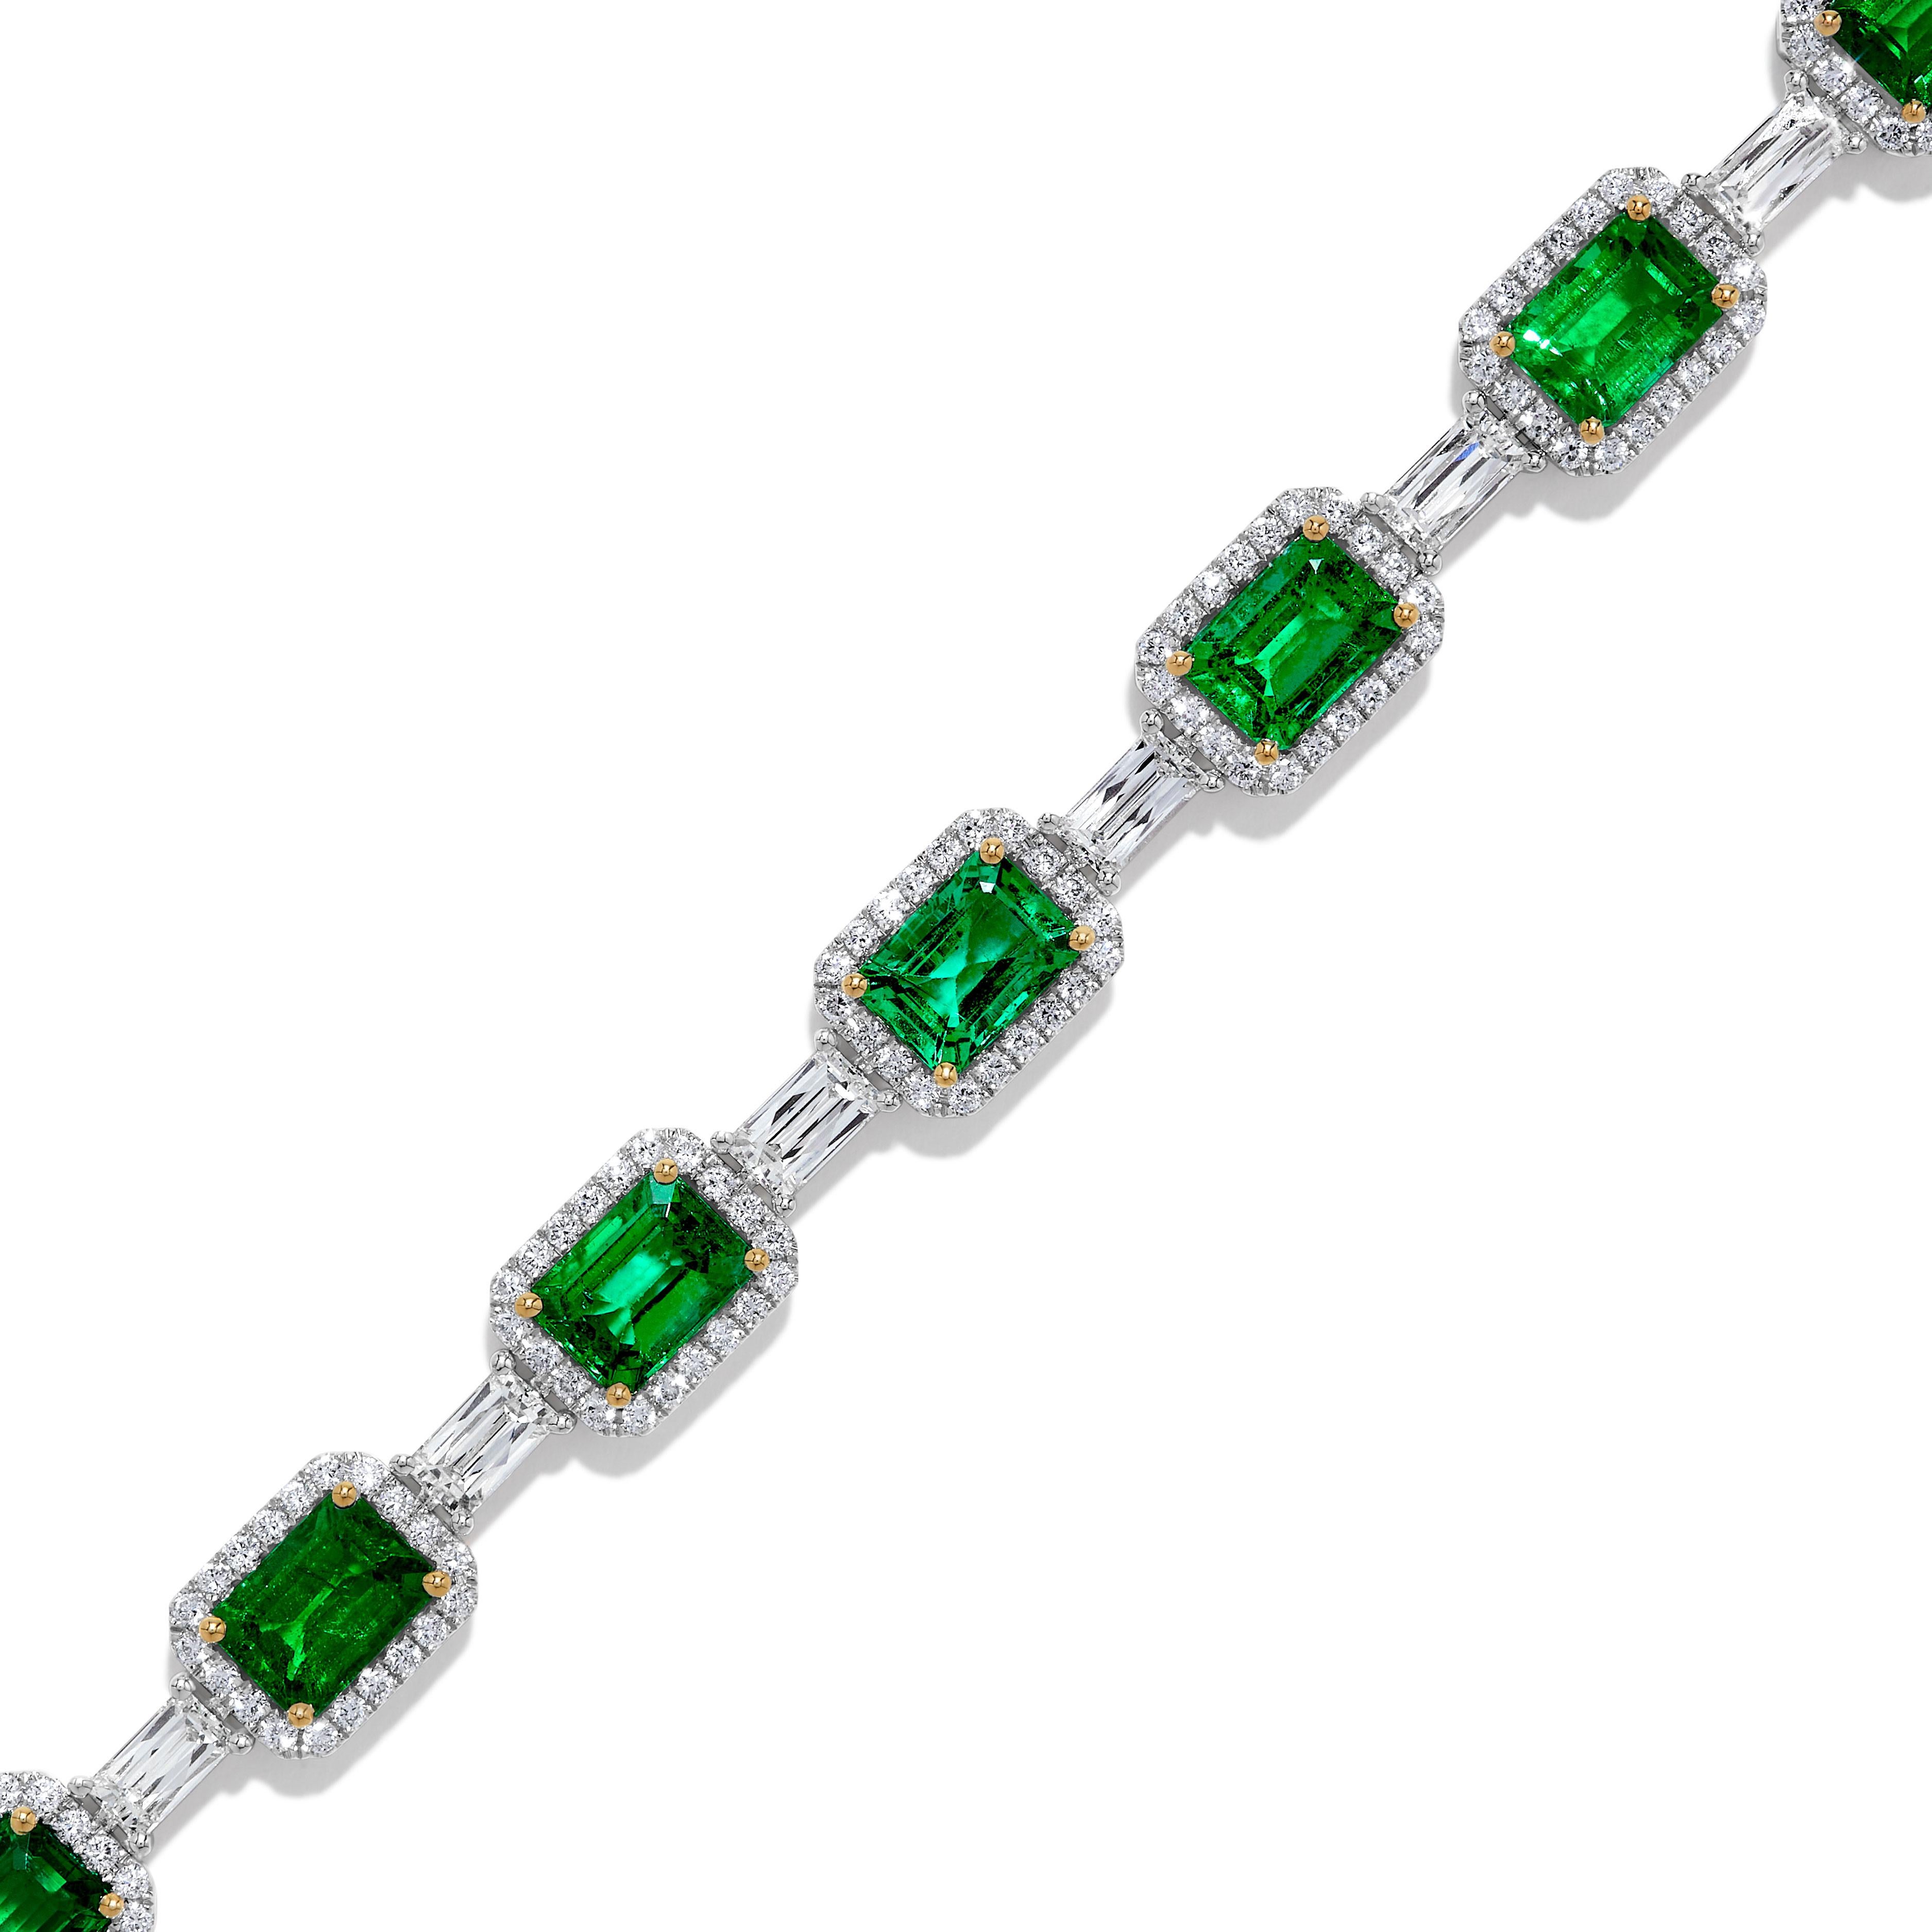 RareGemWorld's classic emerald bracelet. Mounted in a beautiful 18K Yellow and White Gold setting with natural emerald cut emerald's surrounded by natural baguette cut white diamonds and natural round cut white diamond melee. This bracelet is